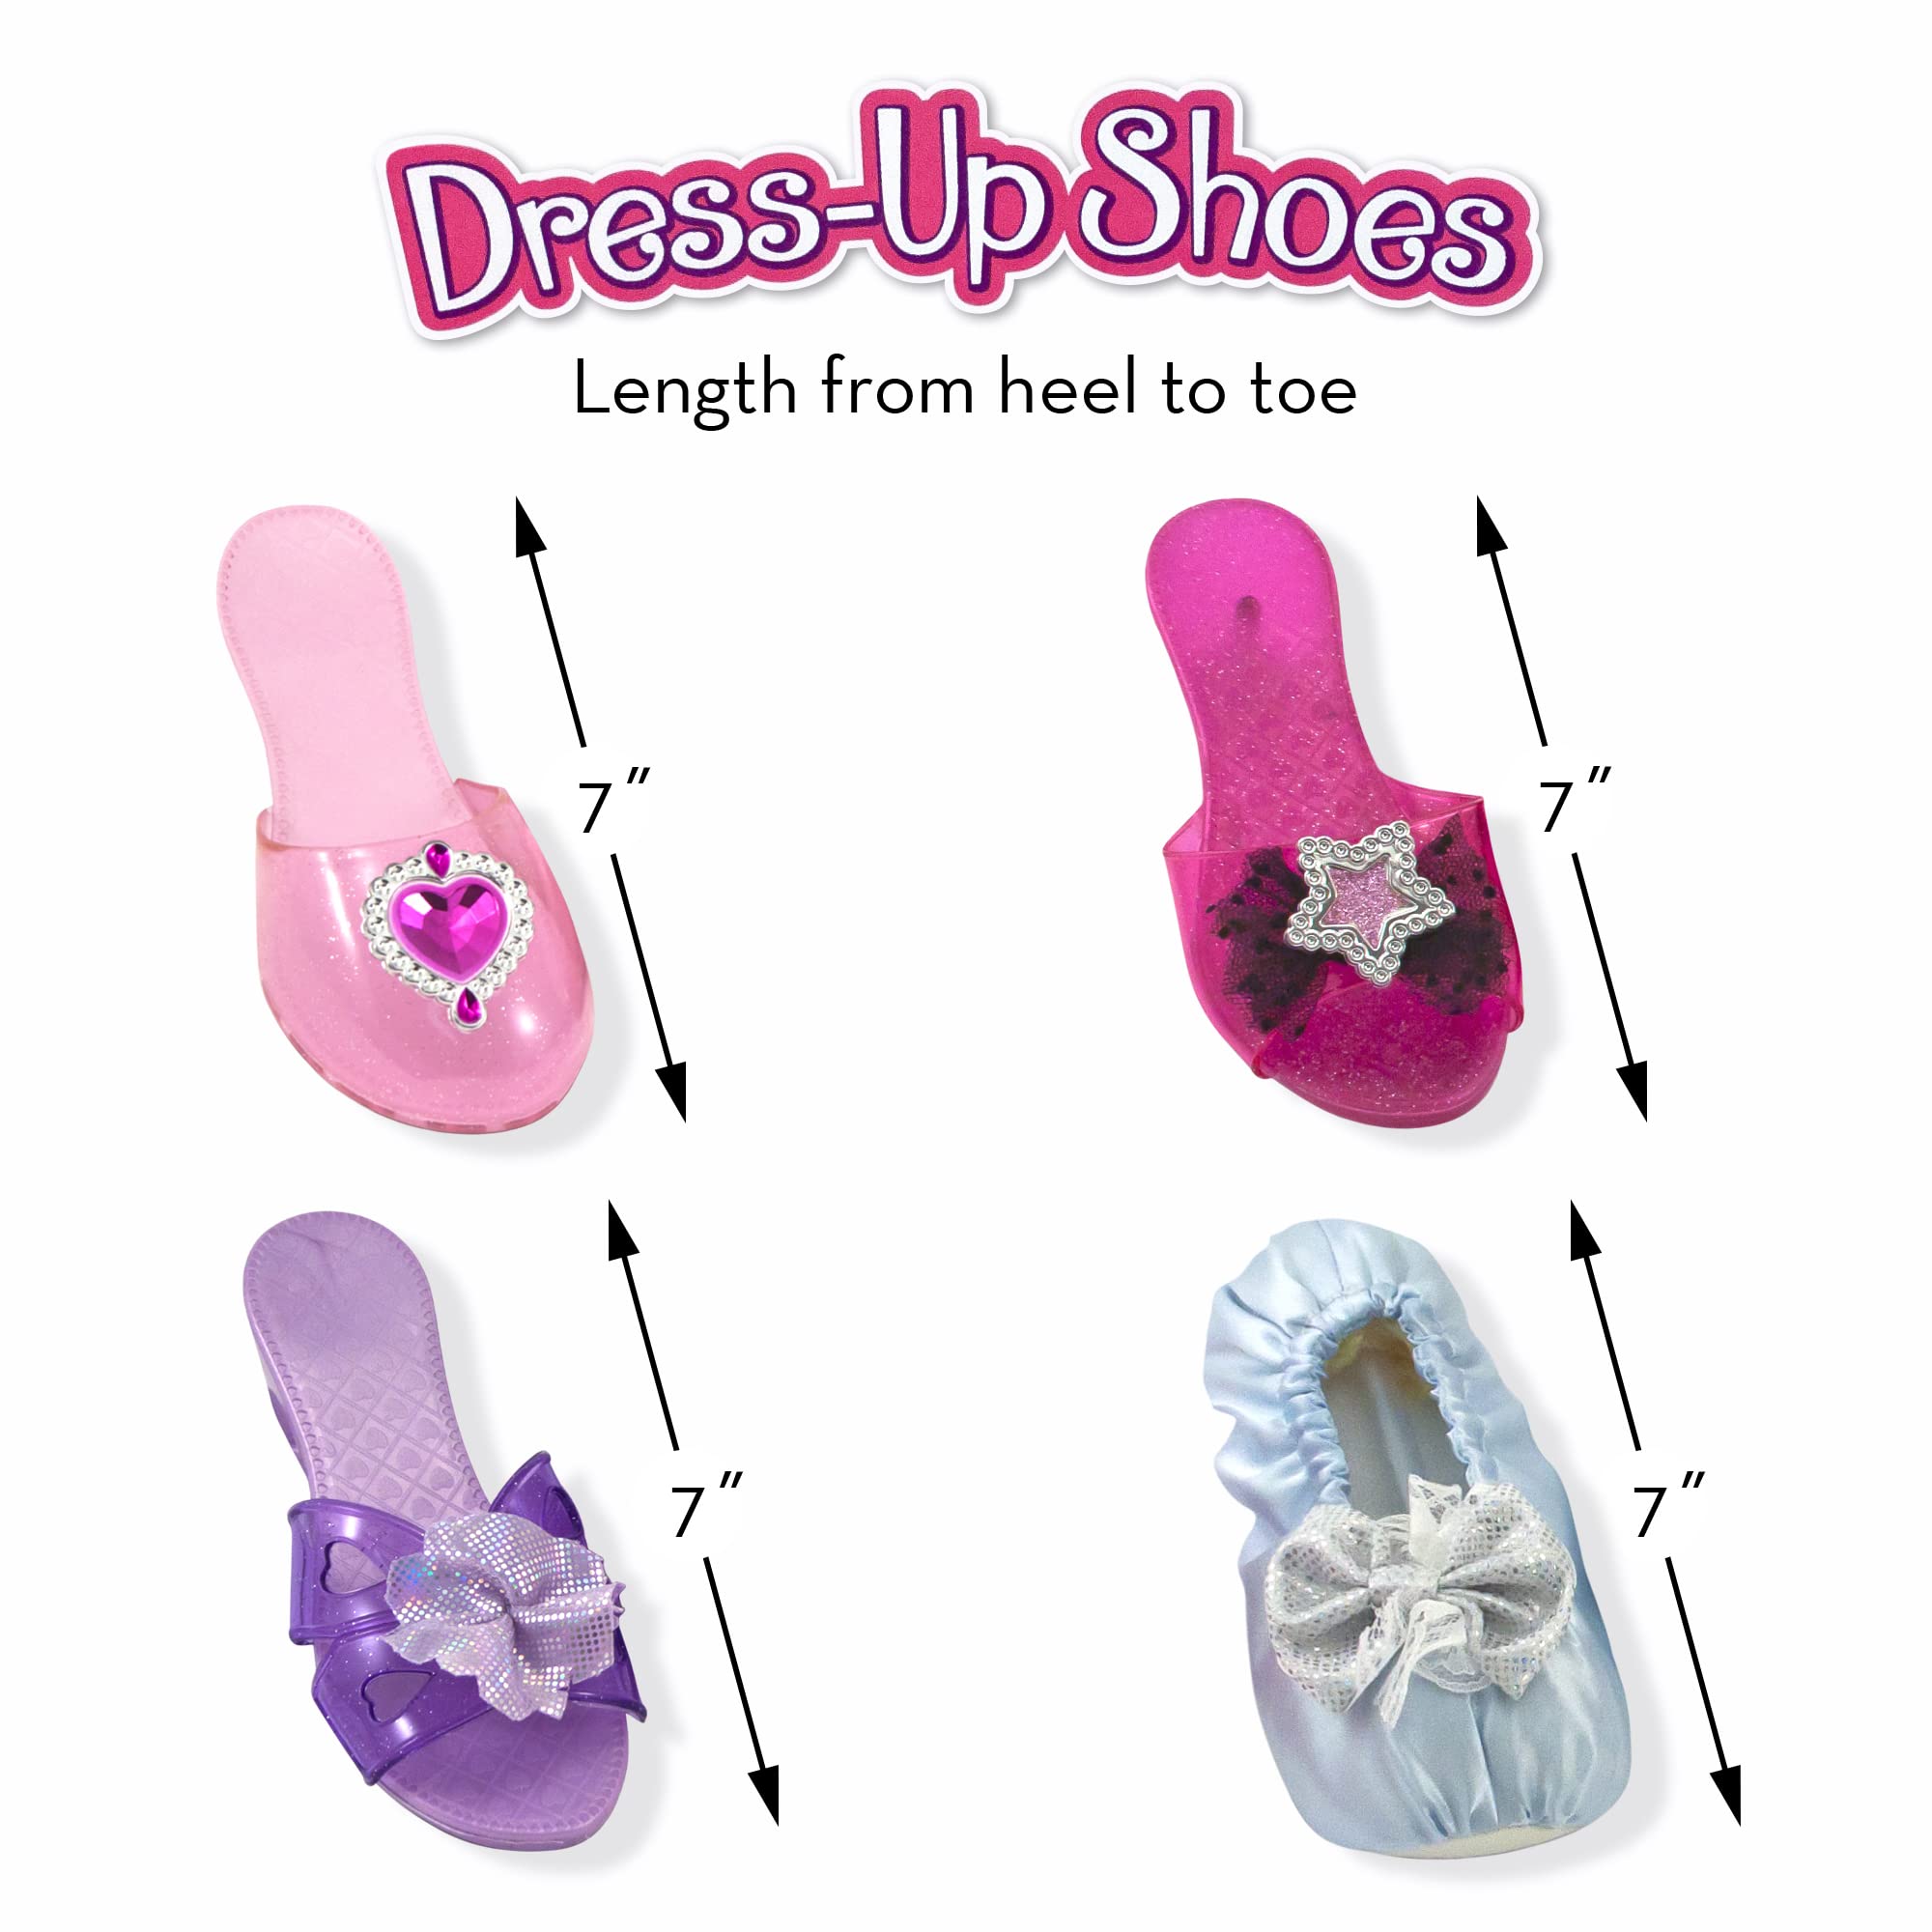 Melissa & Doug Role Play Collection, Step in Style! (Set of 4 Pairs, Frustration-Free Packaging), Multi-colored, Standard